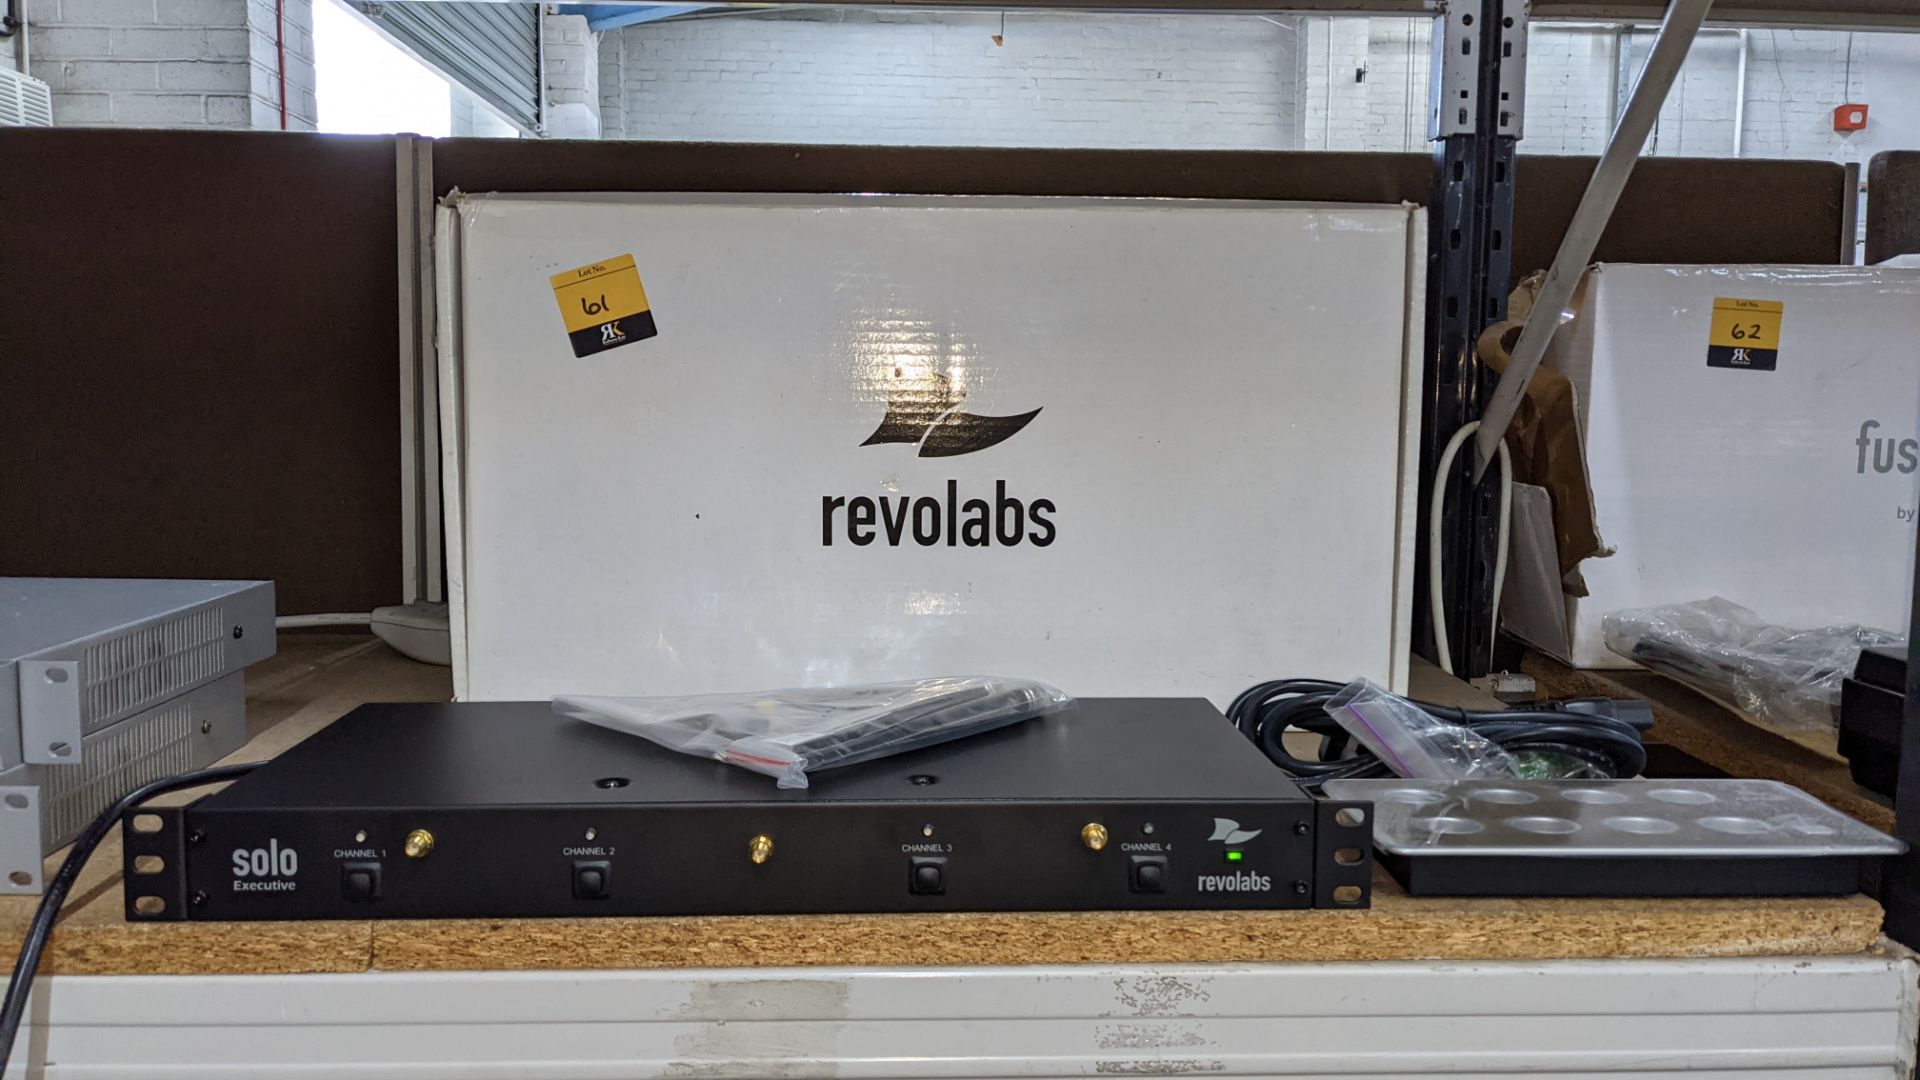 Revolabs Solo executive wireless microphone base station. NB lots 73 & 74 consist of Revolabs Solo - Image 3 of 11